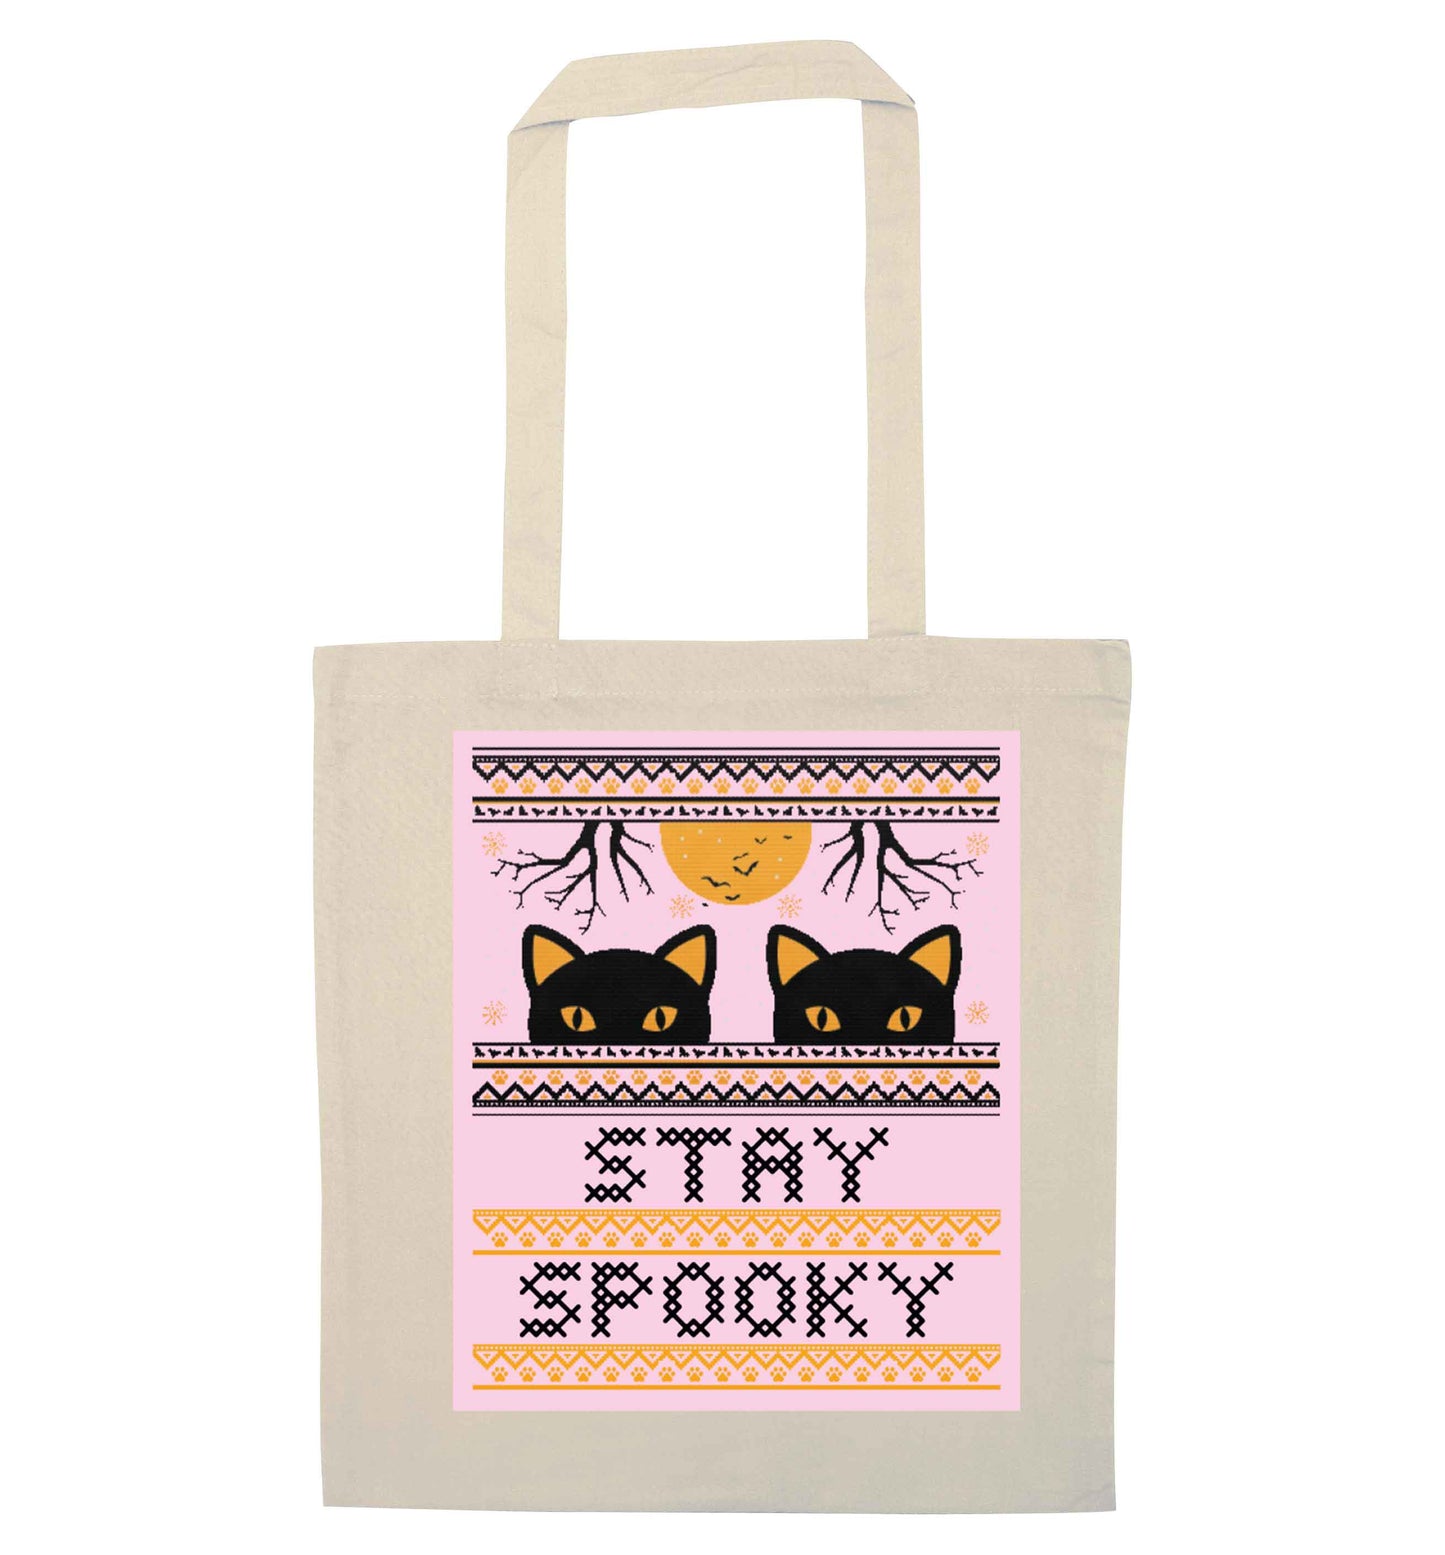 Stay spooky natural tote bag